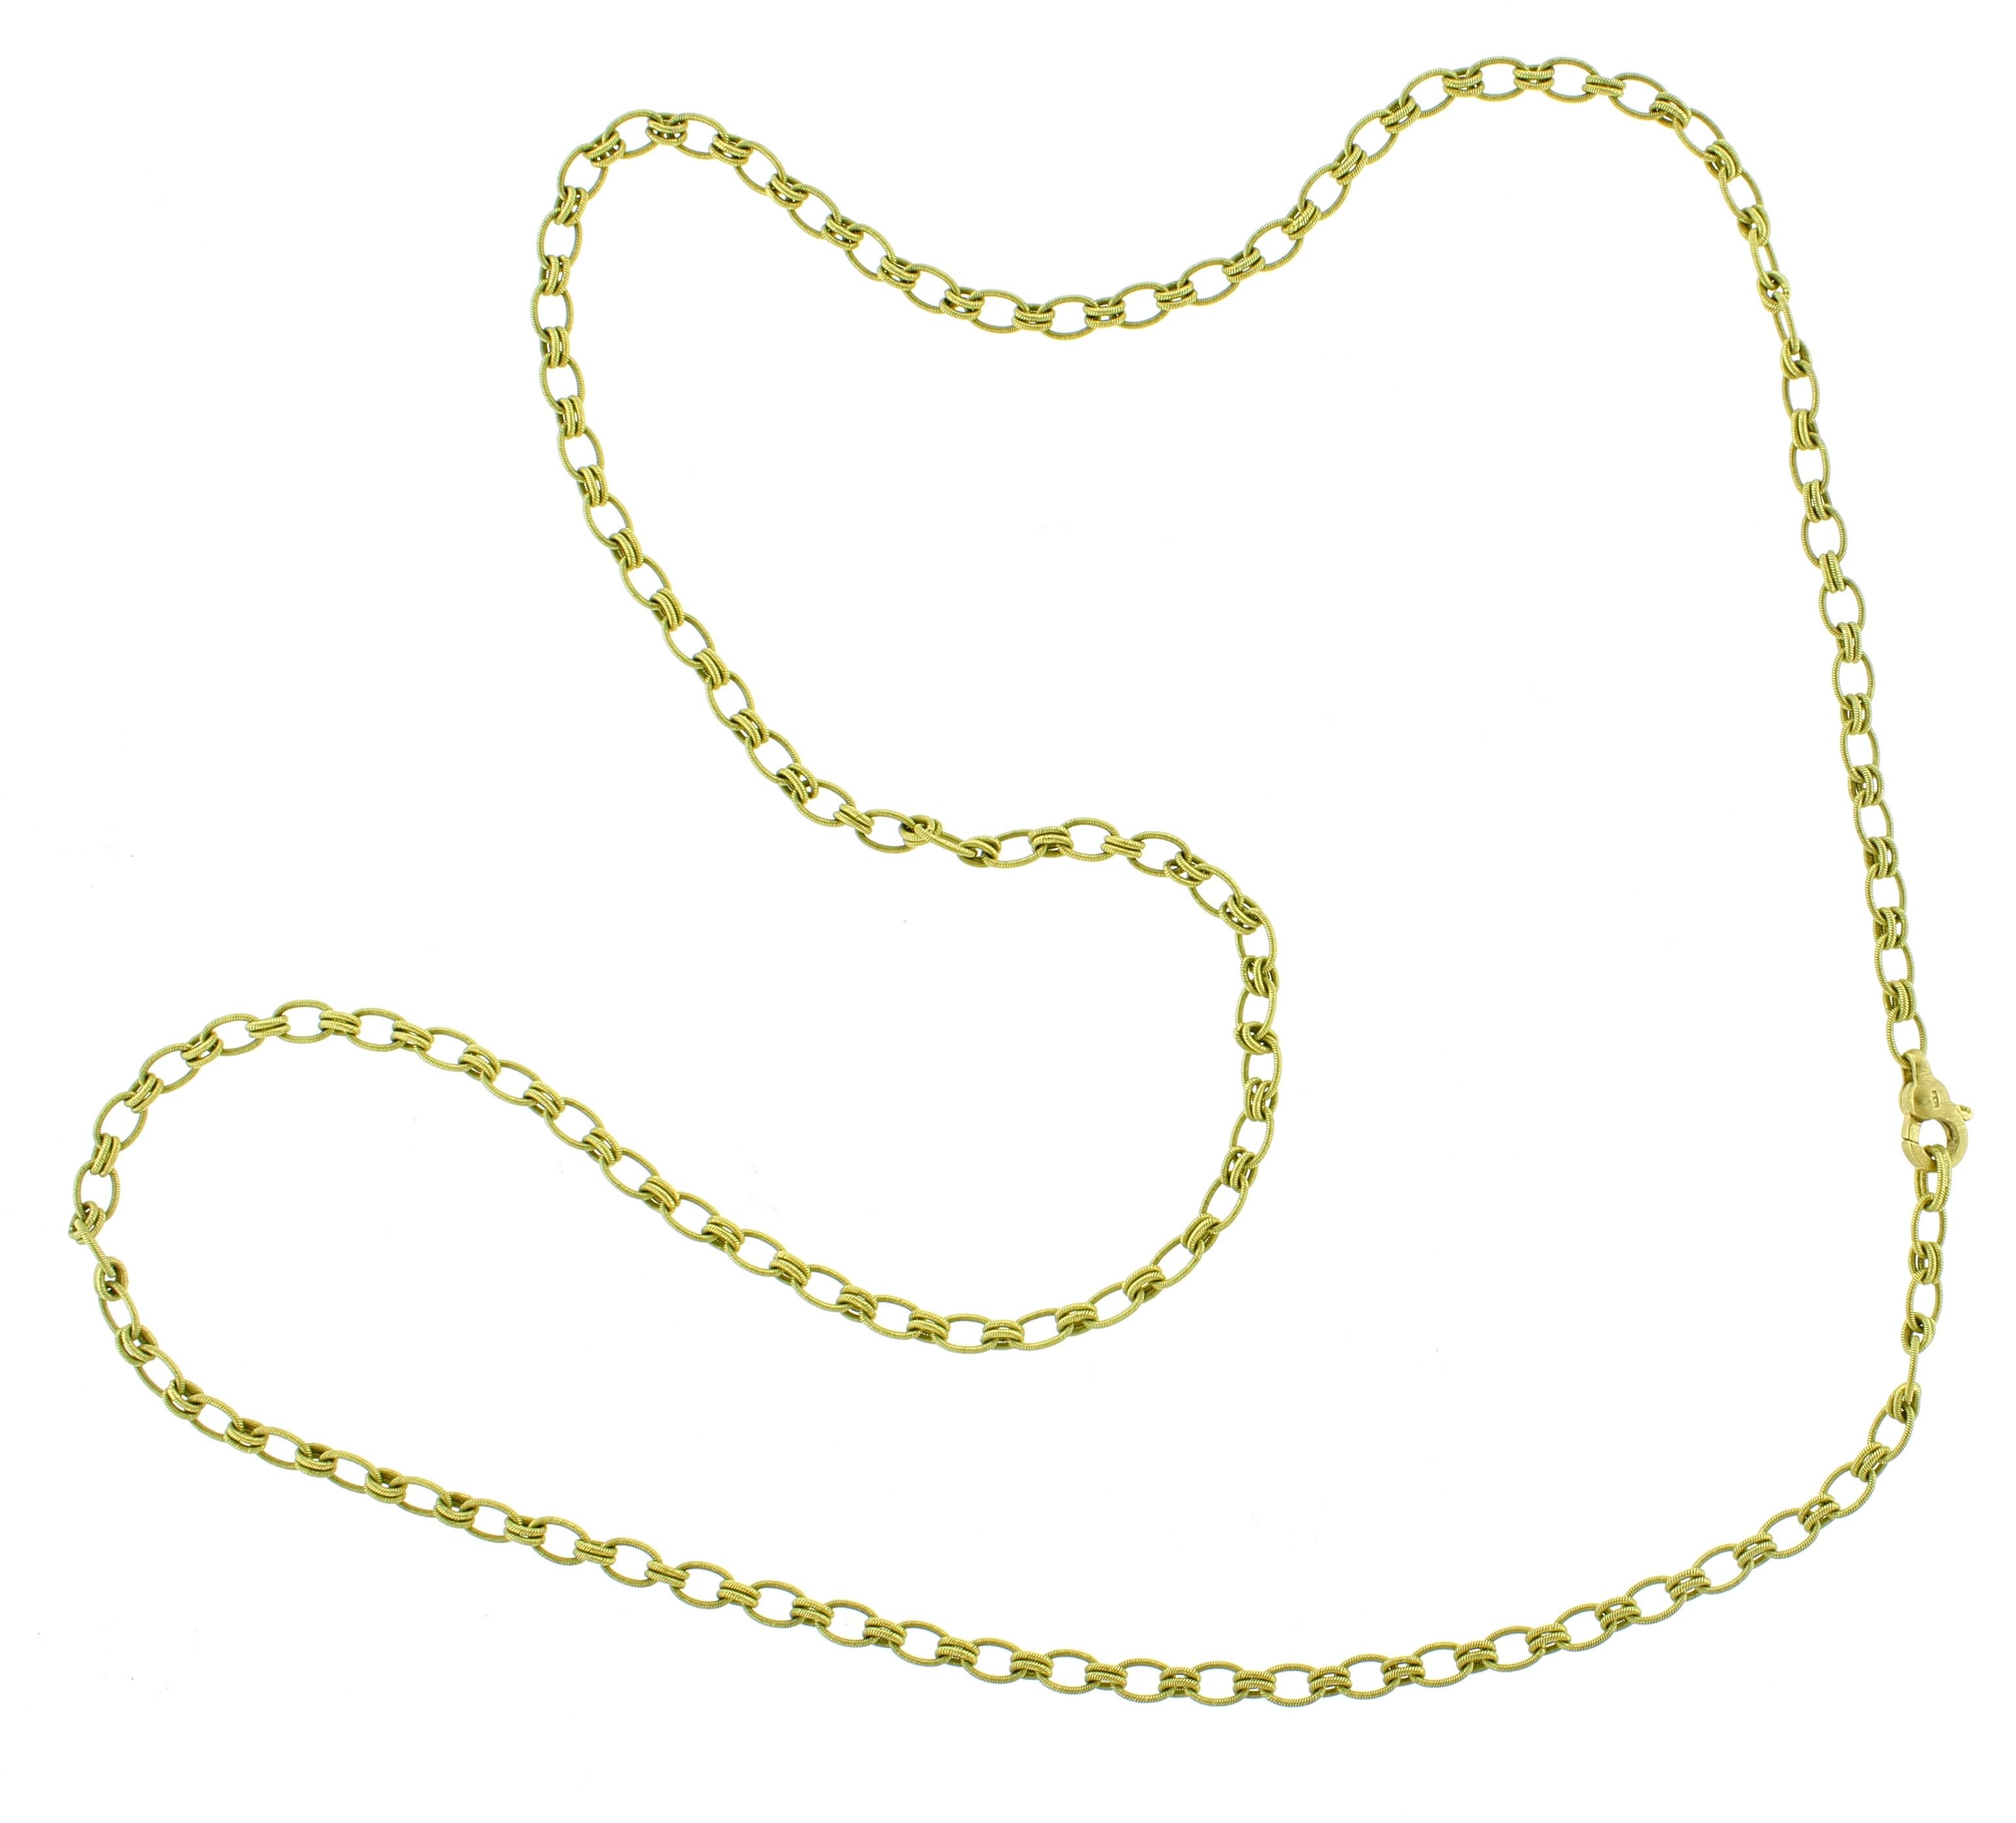 Buccellati Textured Oval Link Chain Necklace In Excellent Condition For Sale In Bethesda, MD